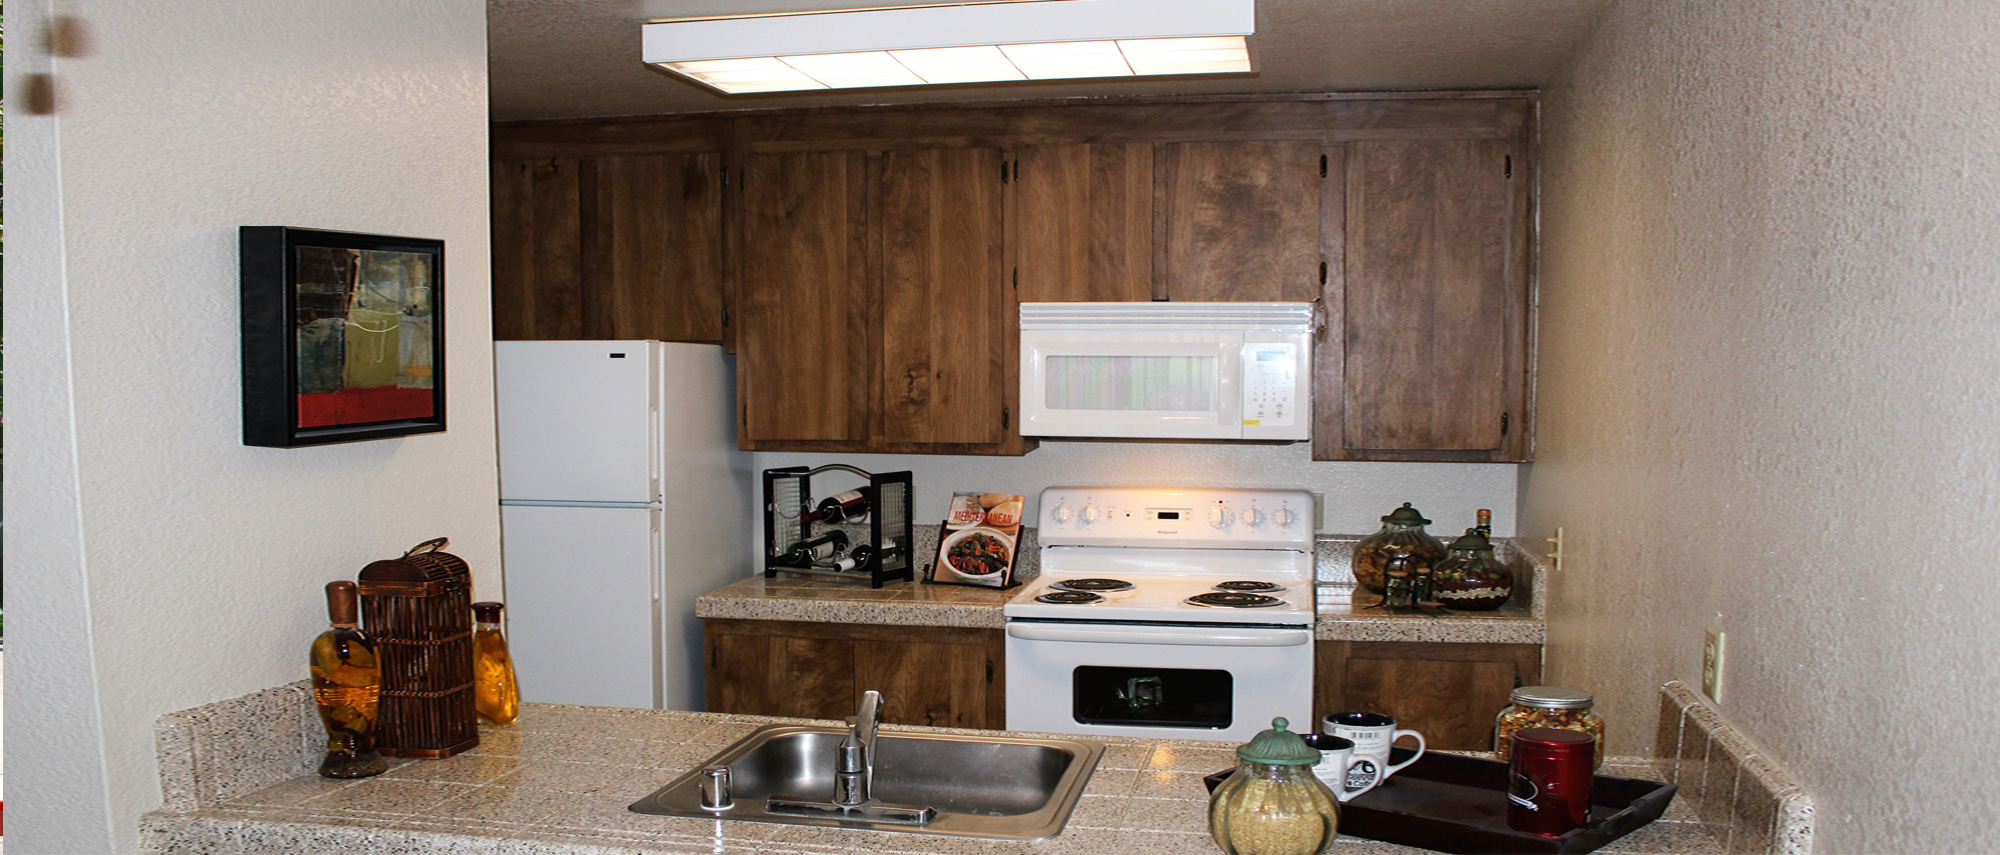 This image shows the kitchen of one of the Sunflorin Village apartment units